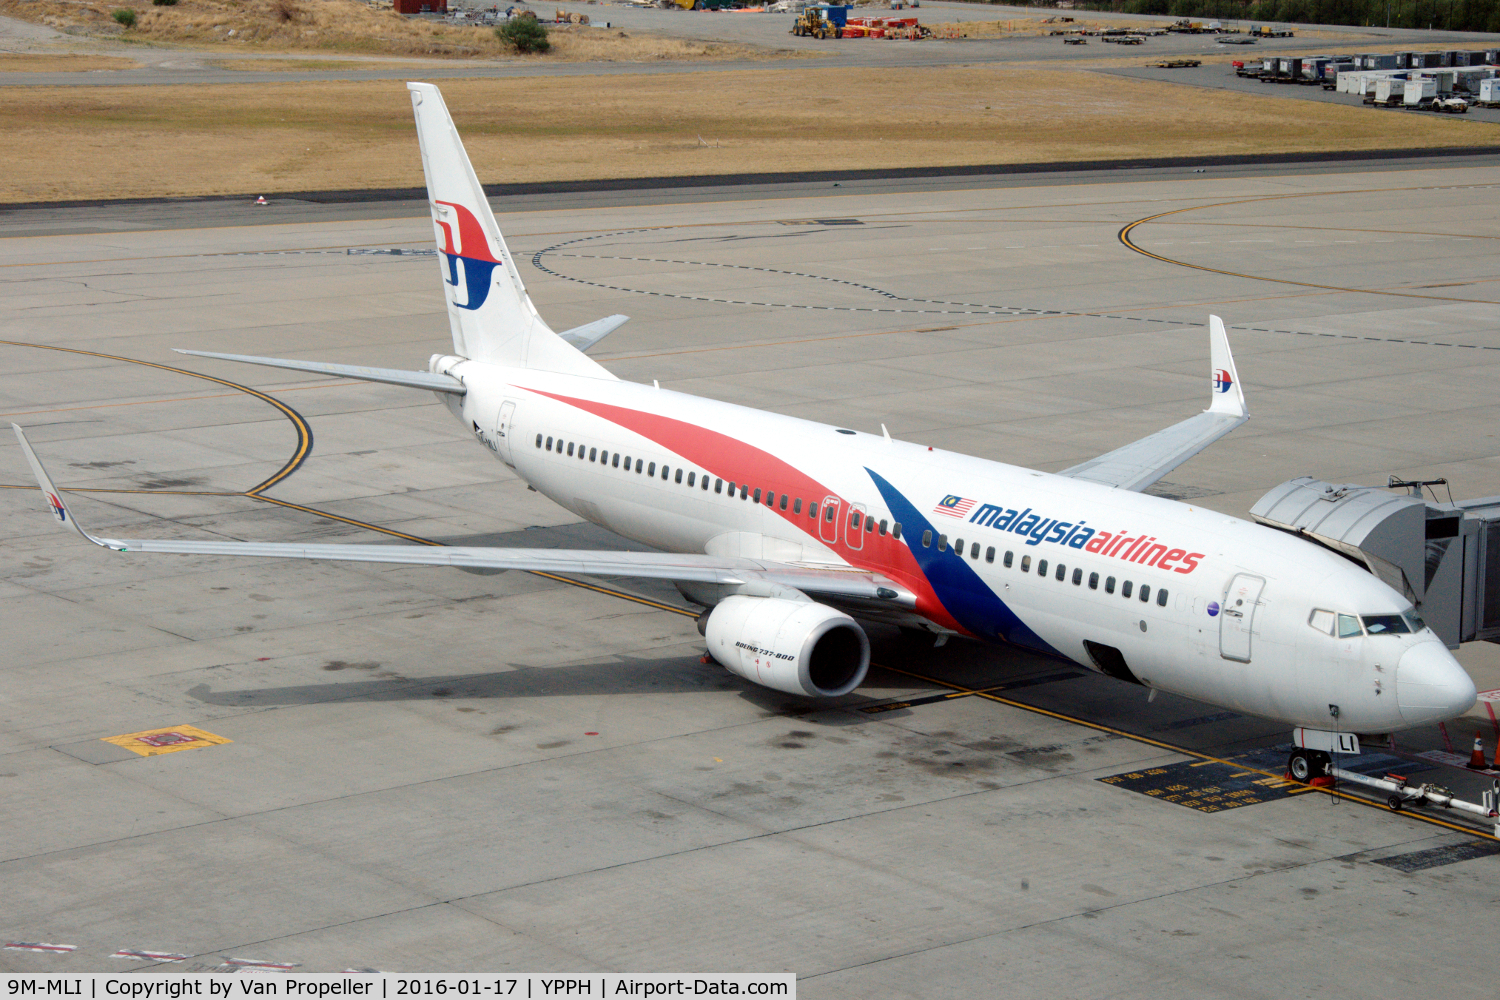 9M-MLI, 2010 Boeing 737-8FZ C/N 31793, Boeing 737-8FZ of Malaysia Airlines at Perth airport, wstern Australia